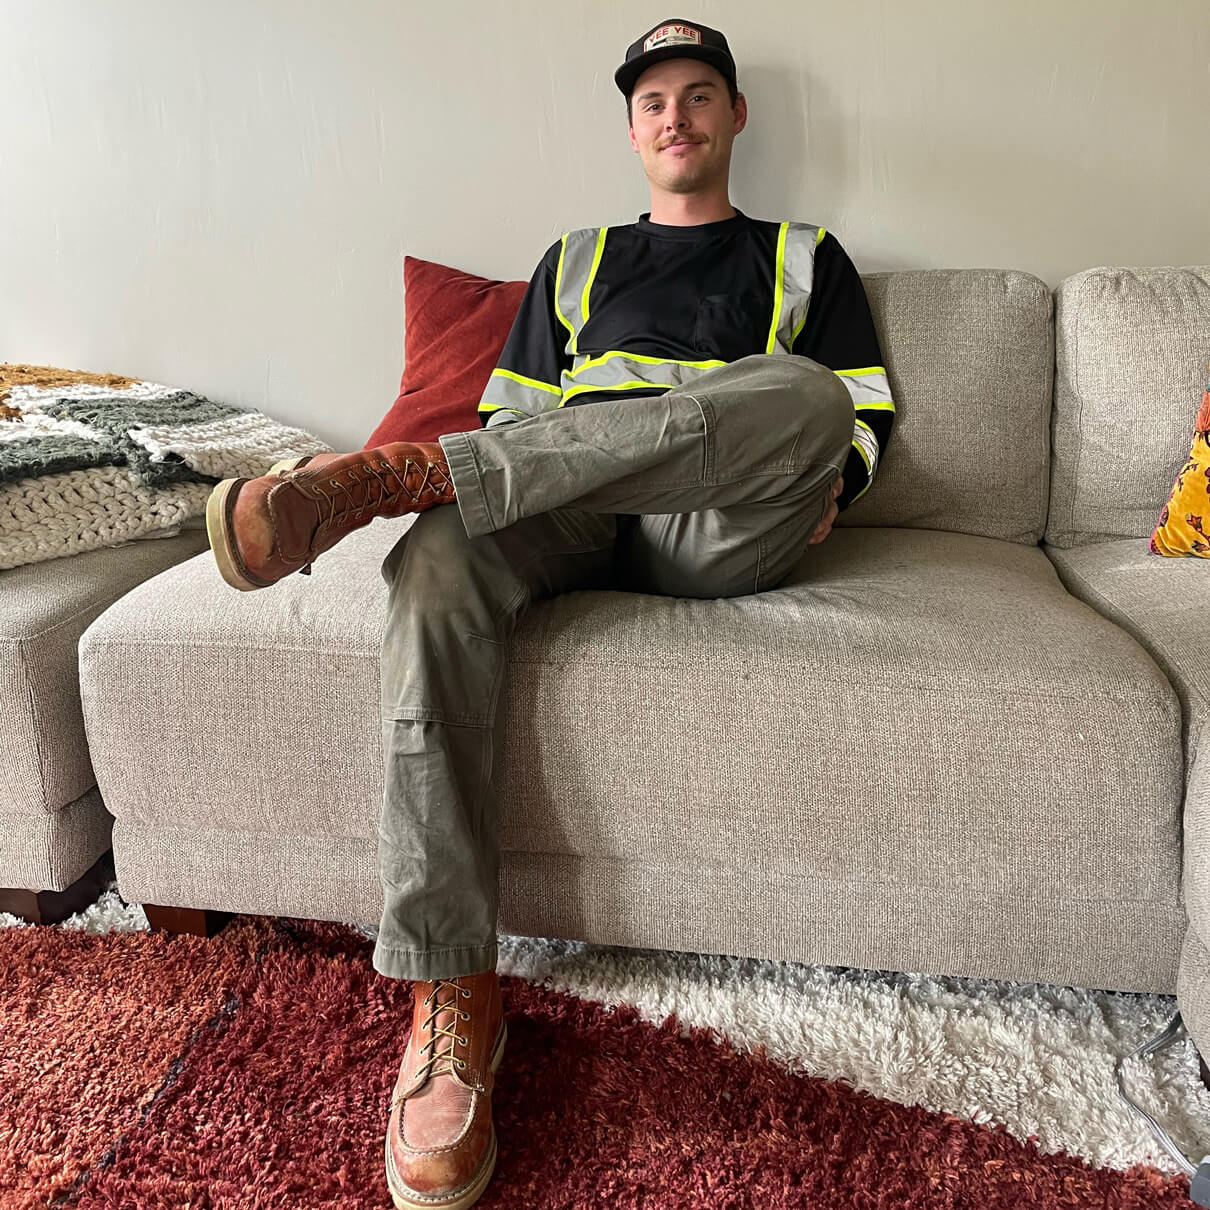 Image of a guy sitting on a couch with a safety shirt on